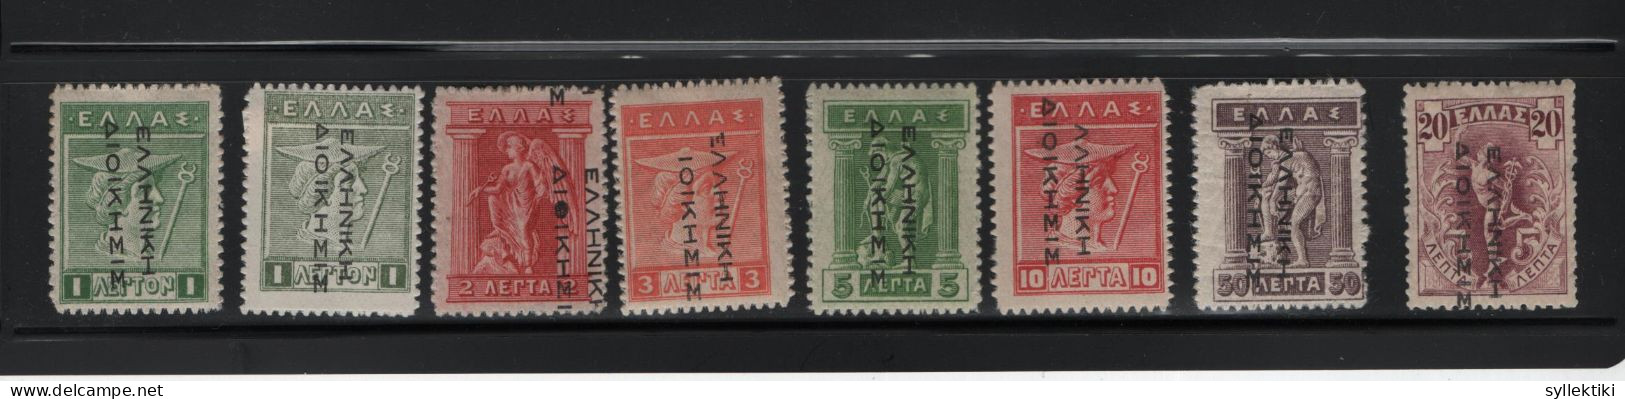 GREECE 1913 GREEK ADMIN READING DOWN 1 LEPTON - 20 LEPTA 8 DIFFERENT MH STAMPS  HELLAS No 251 - 255, 258 - 260 AND VALU - Nuovi